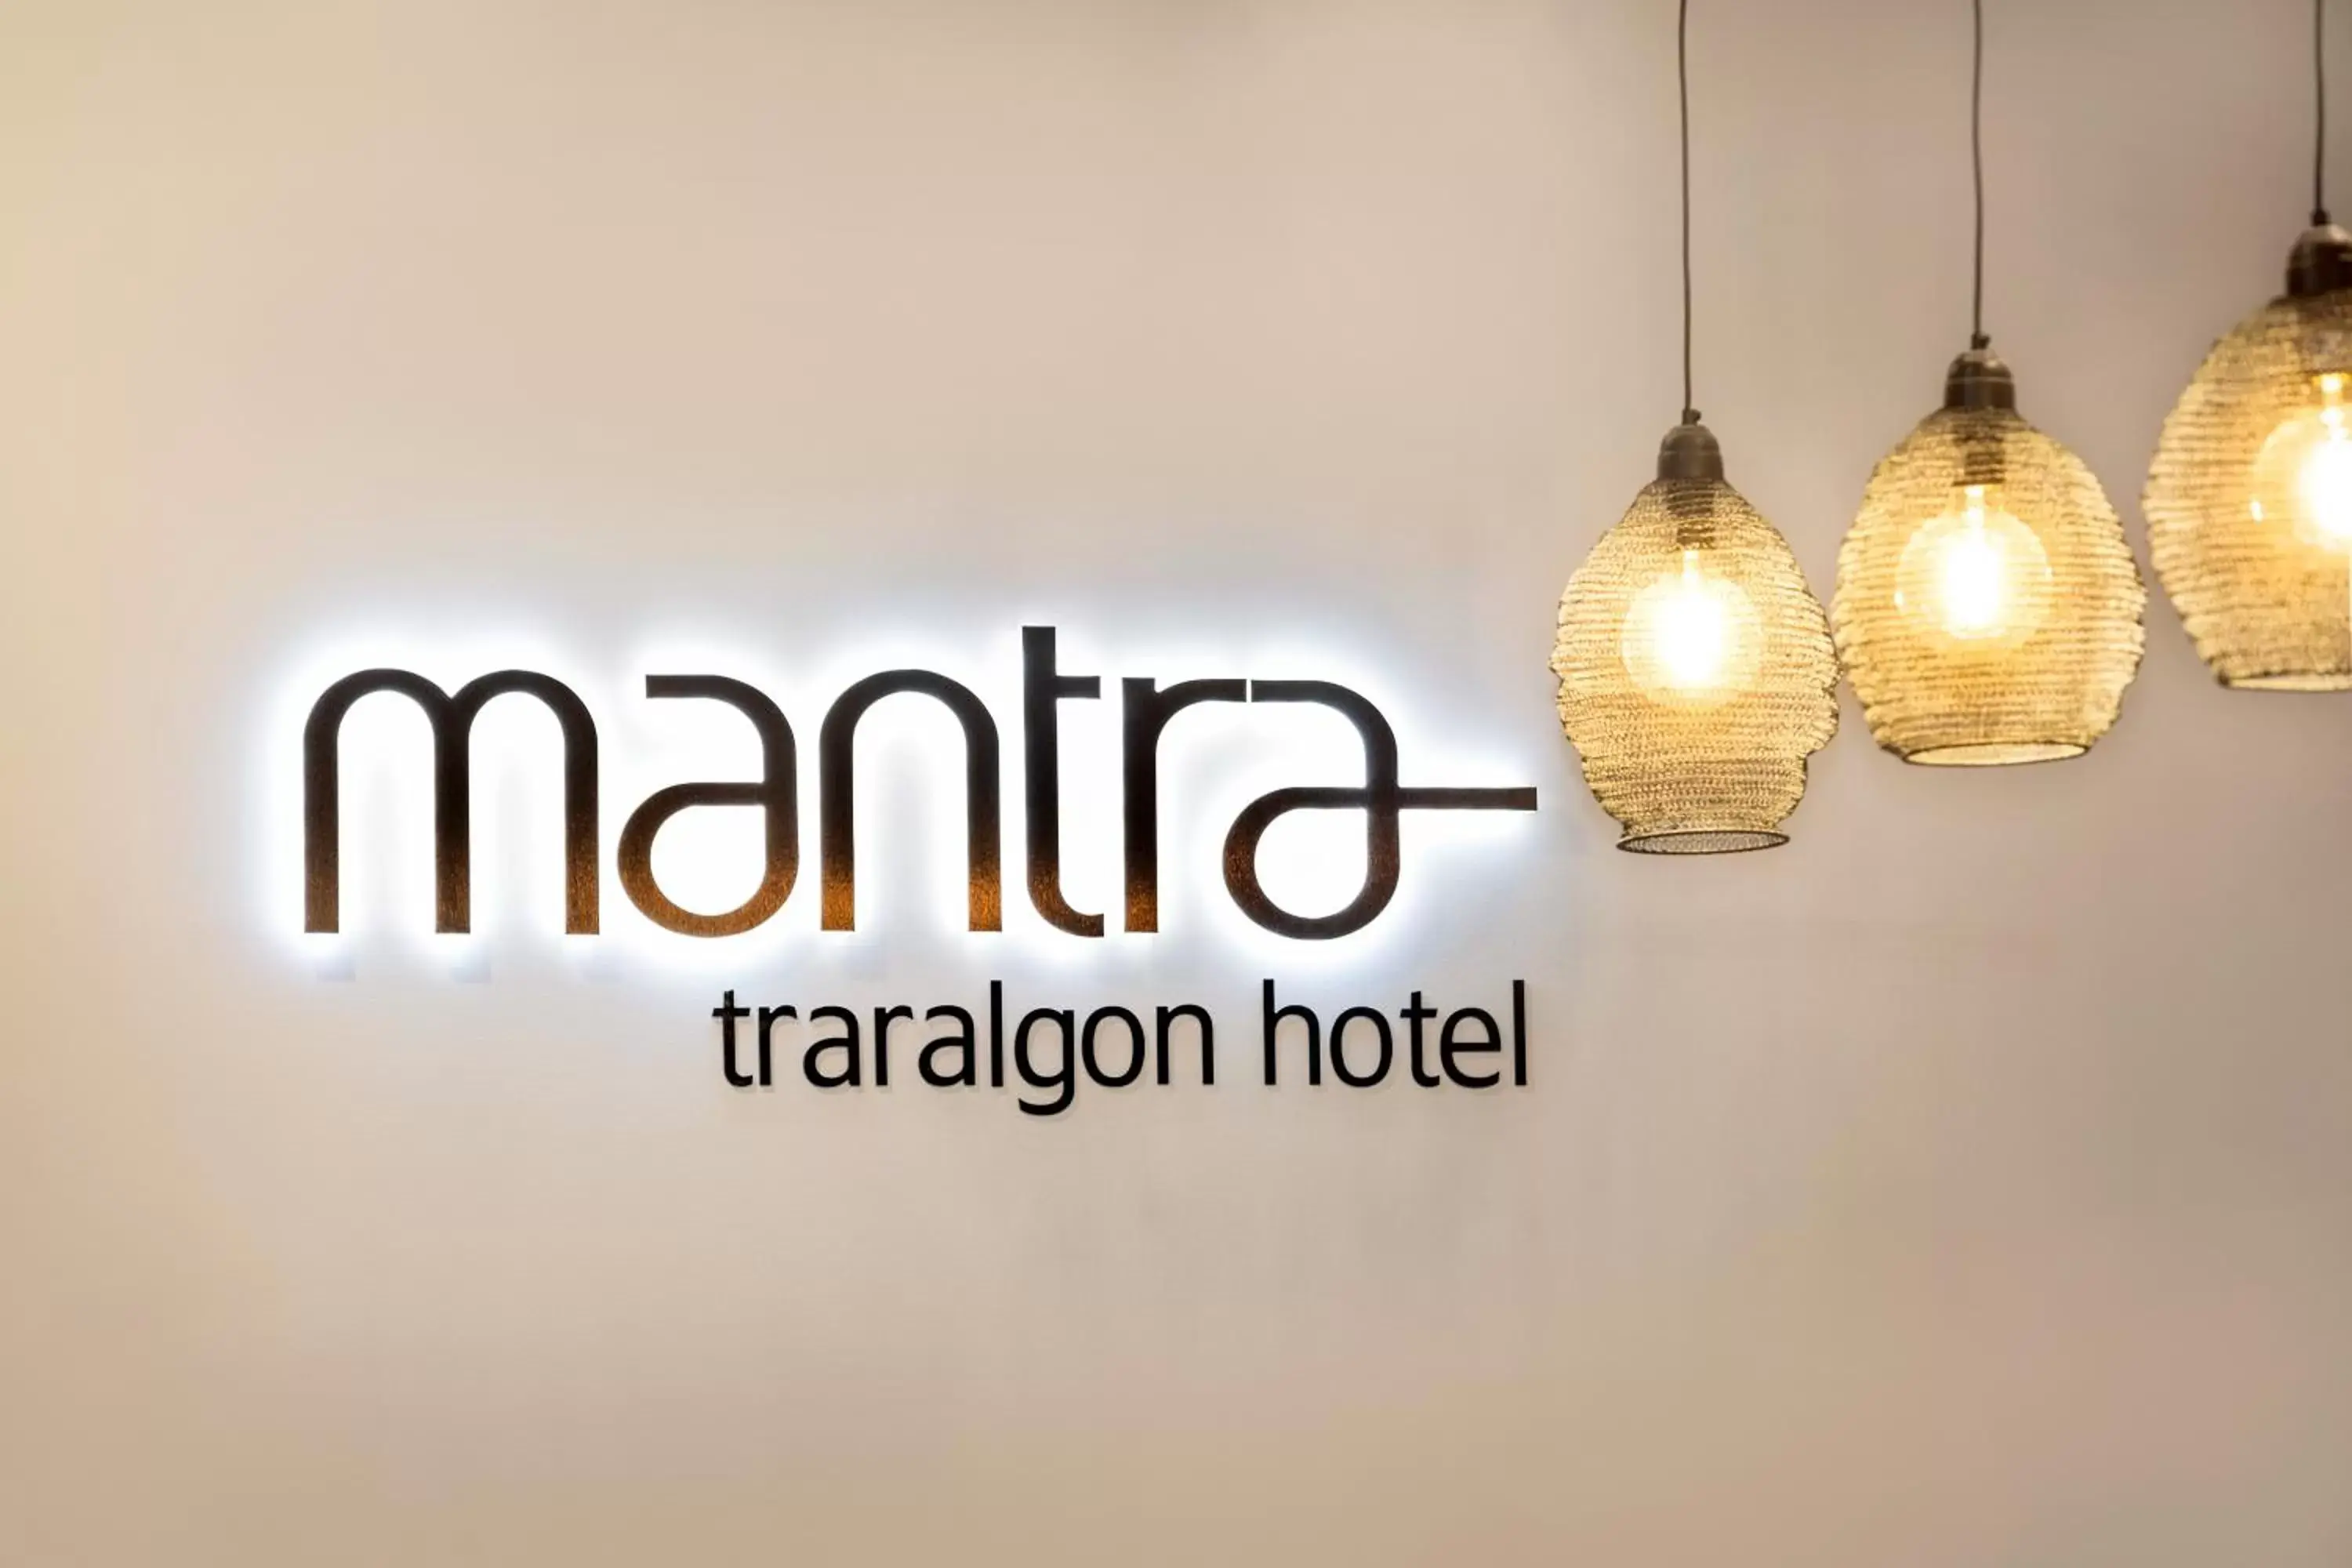 Property logo or sign in Mantra Traralgon